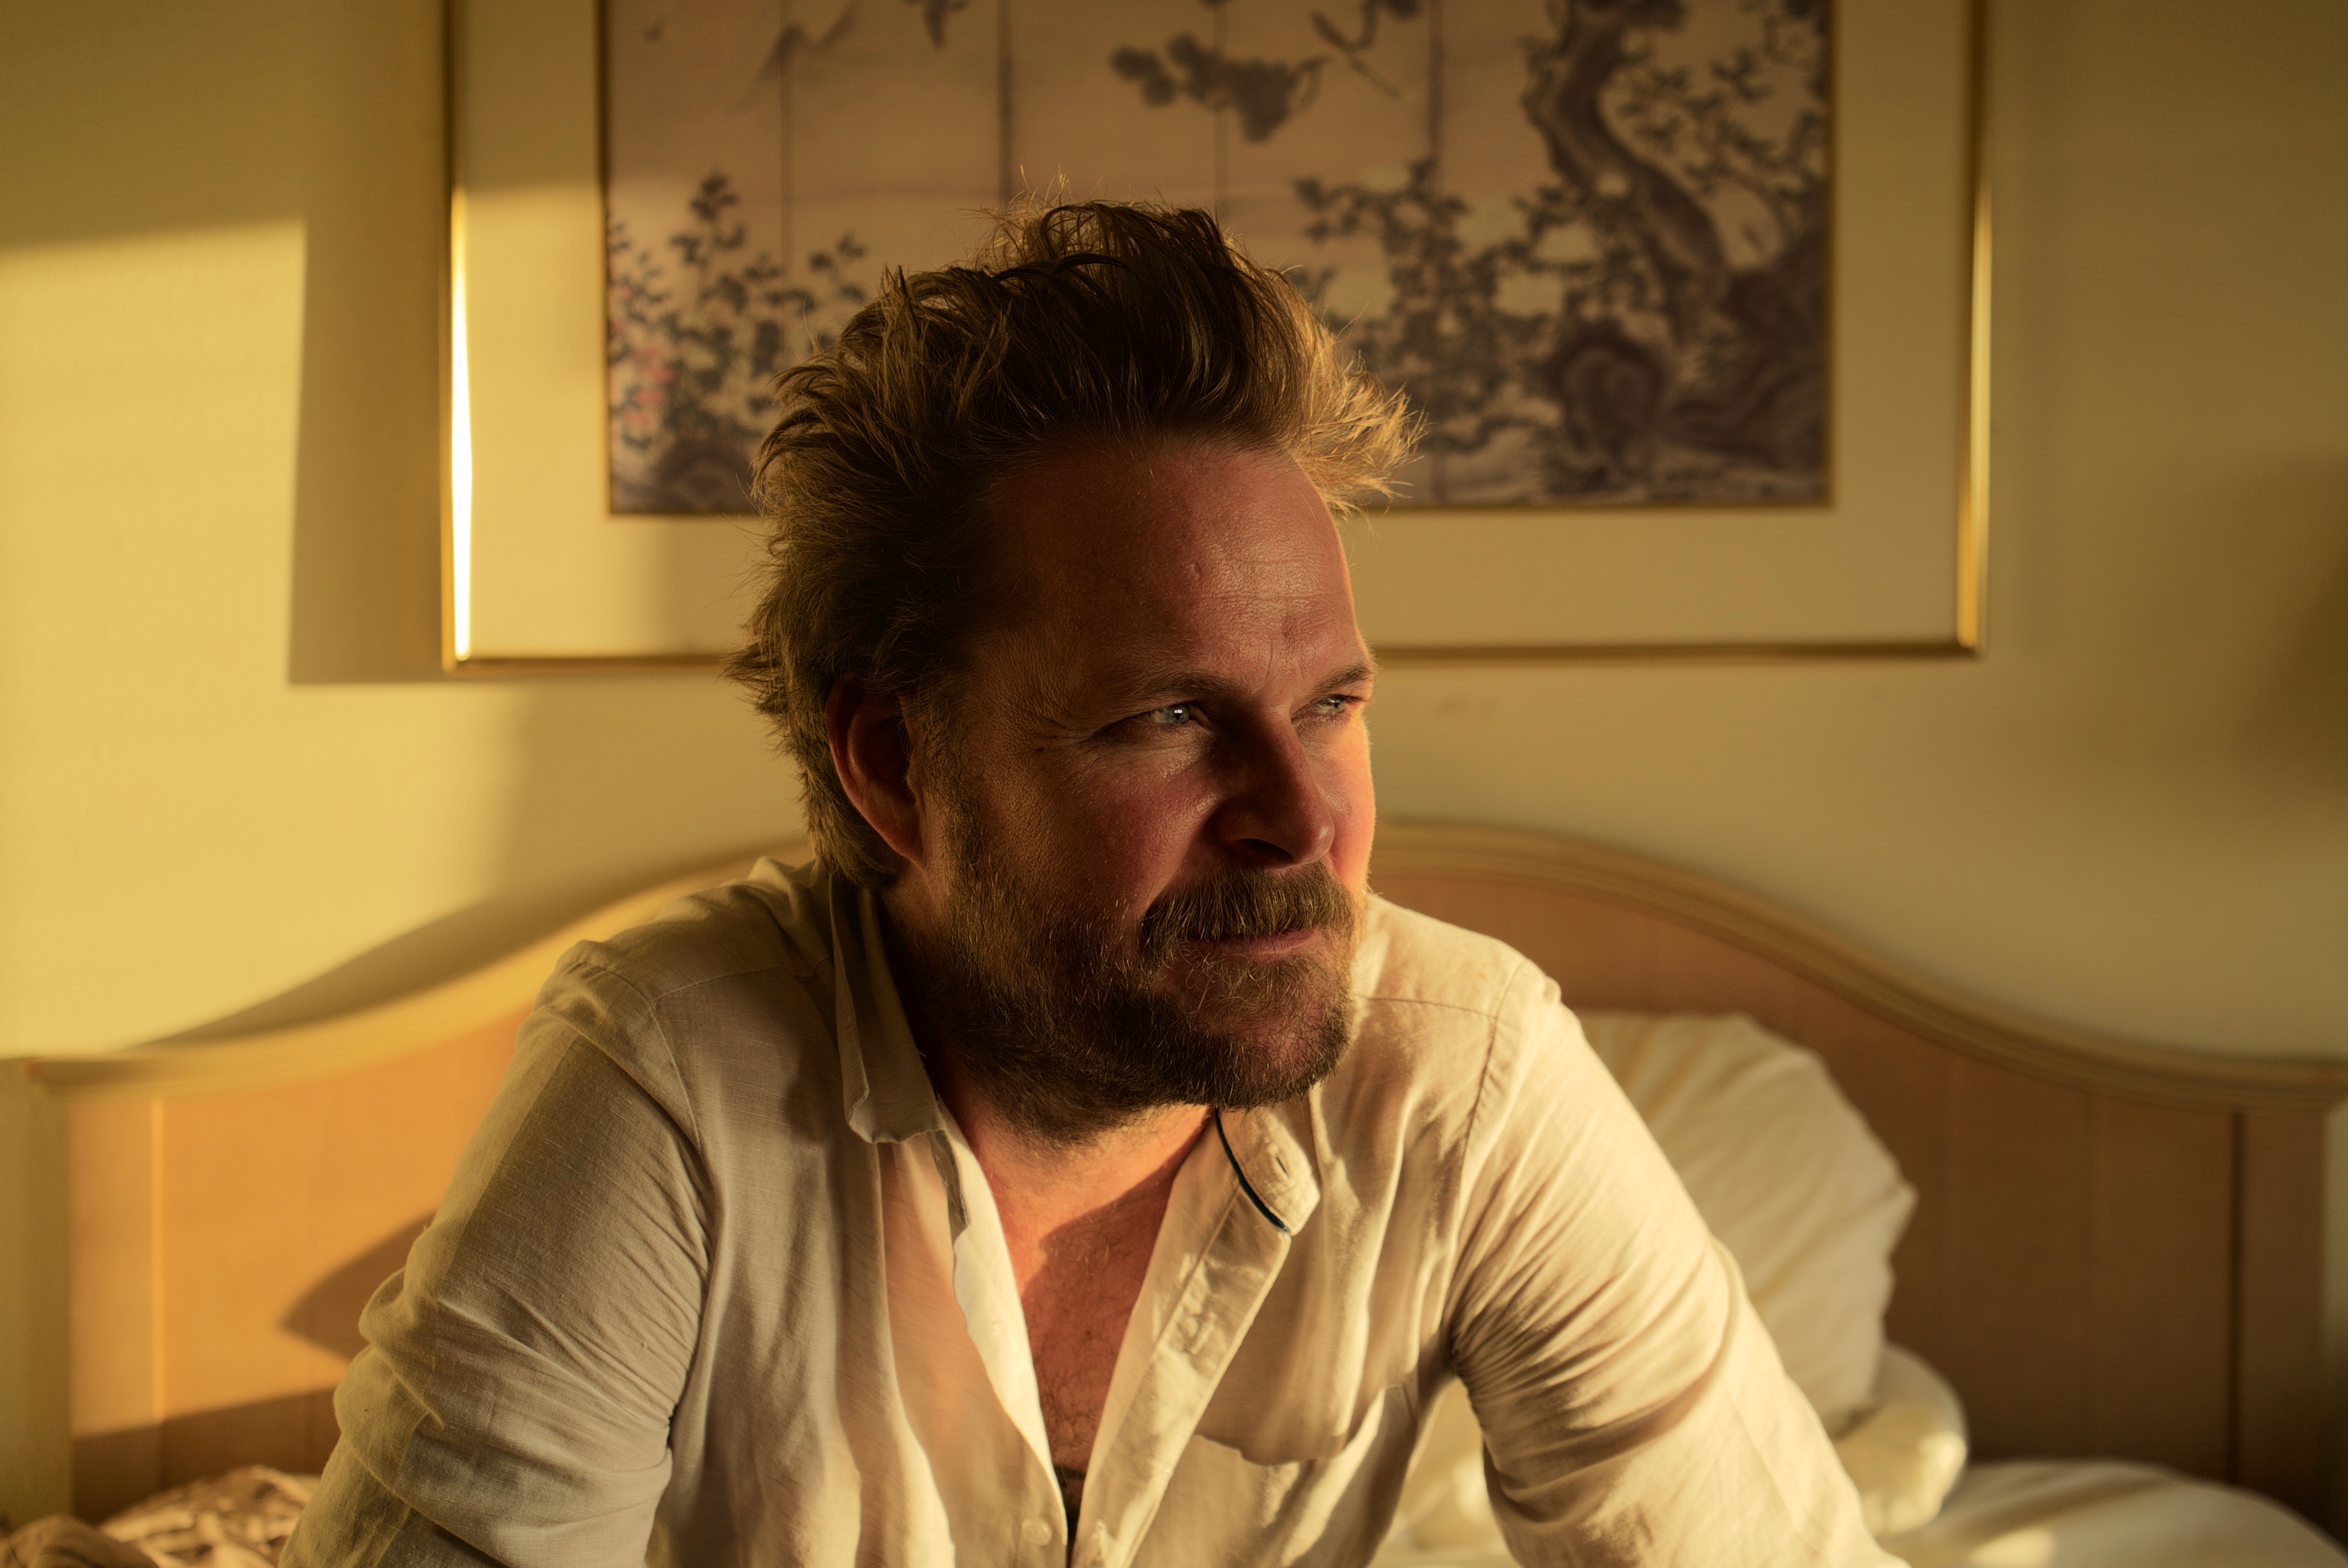 Hiss Golden Messenger – "Domino (Time Will Tell)" & "When the Wall Comes Down"